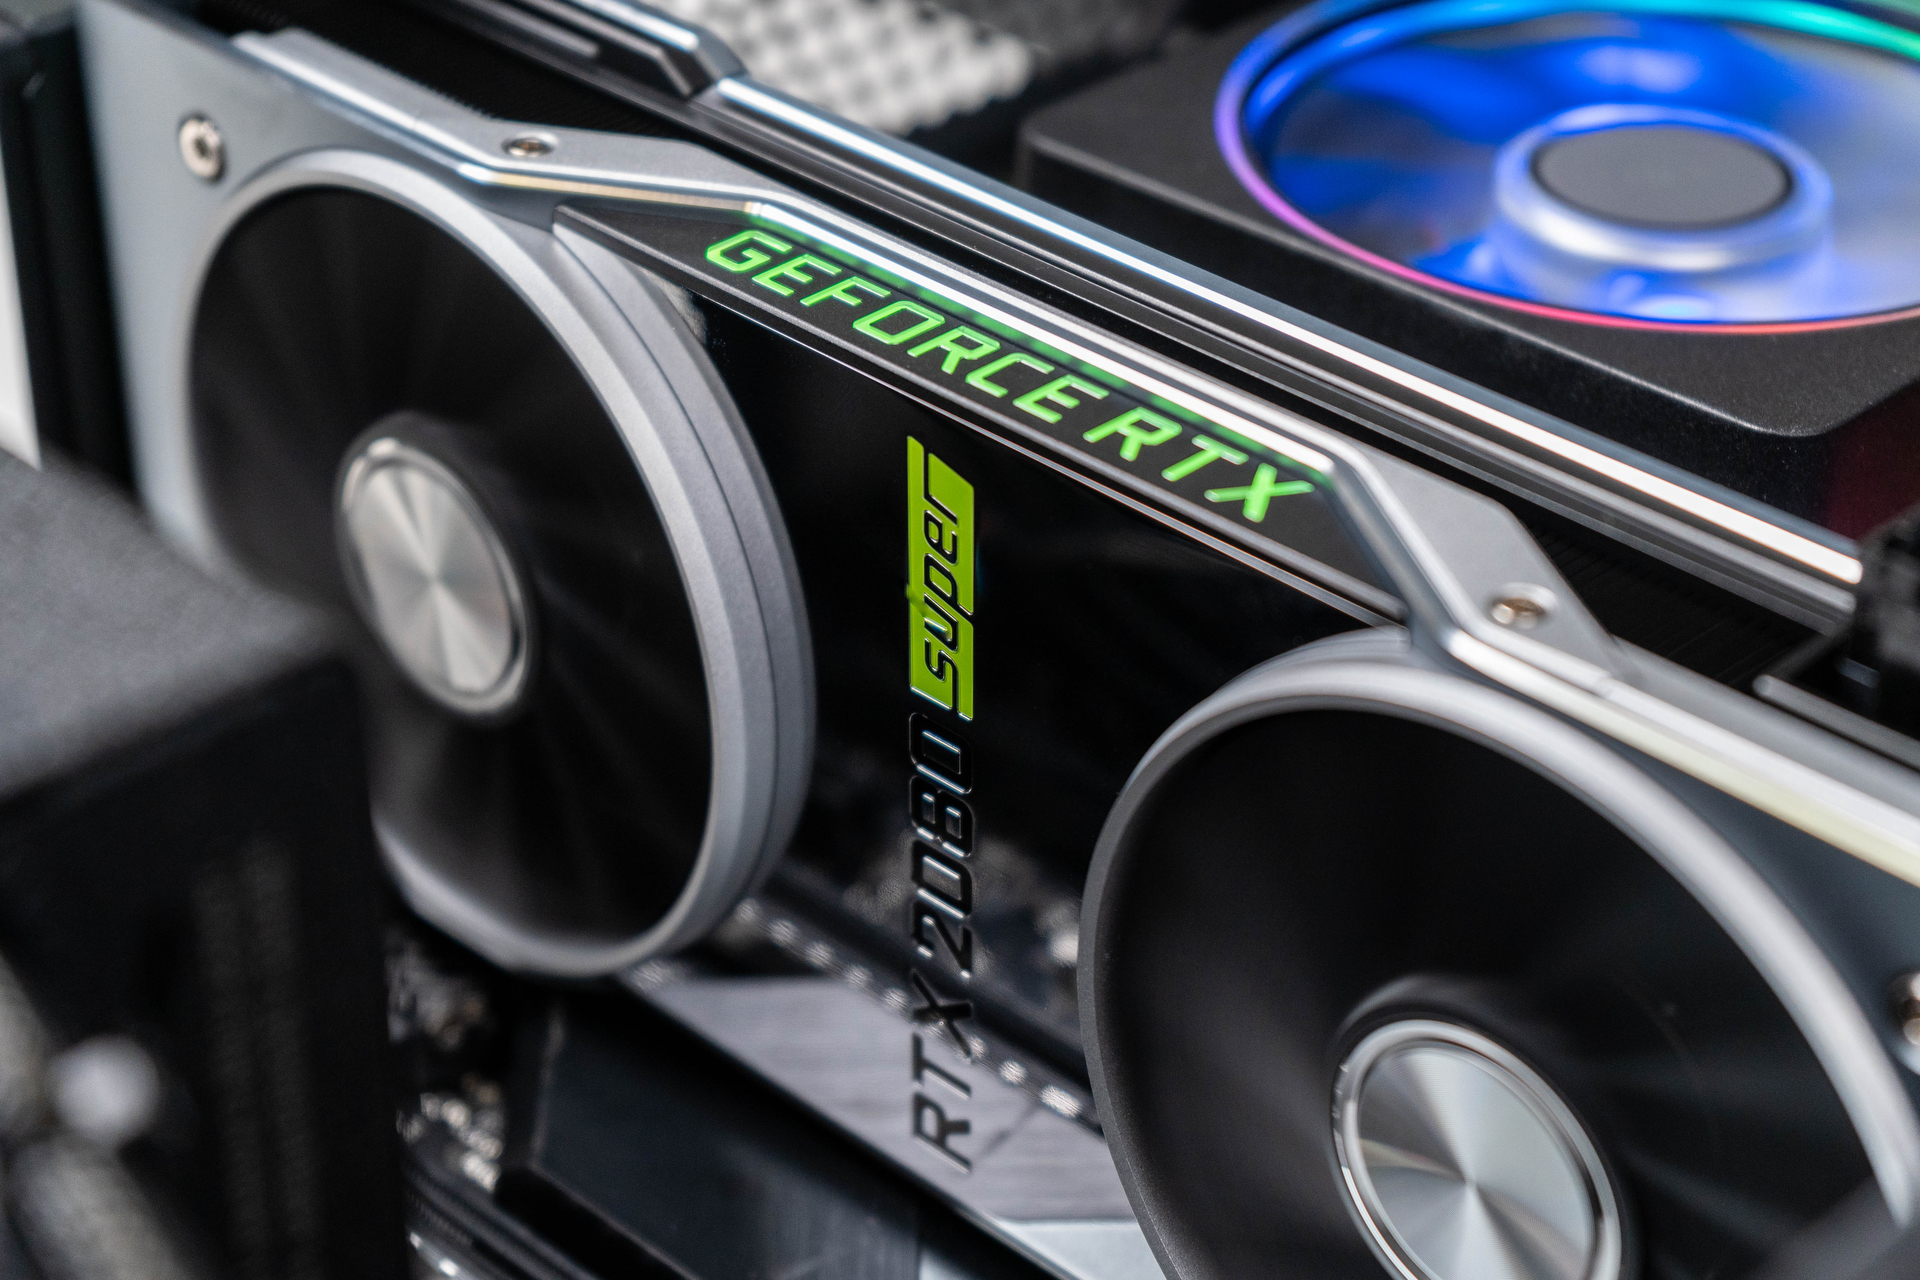 How to Upgrade the Graphics Card of Your Gaming PC